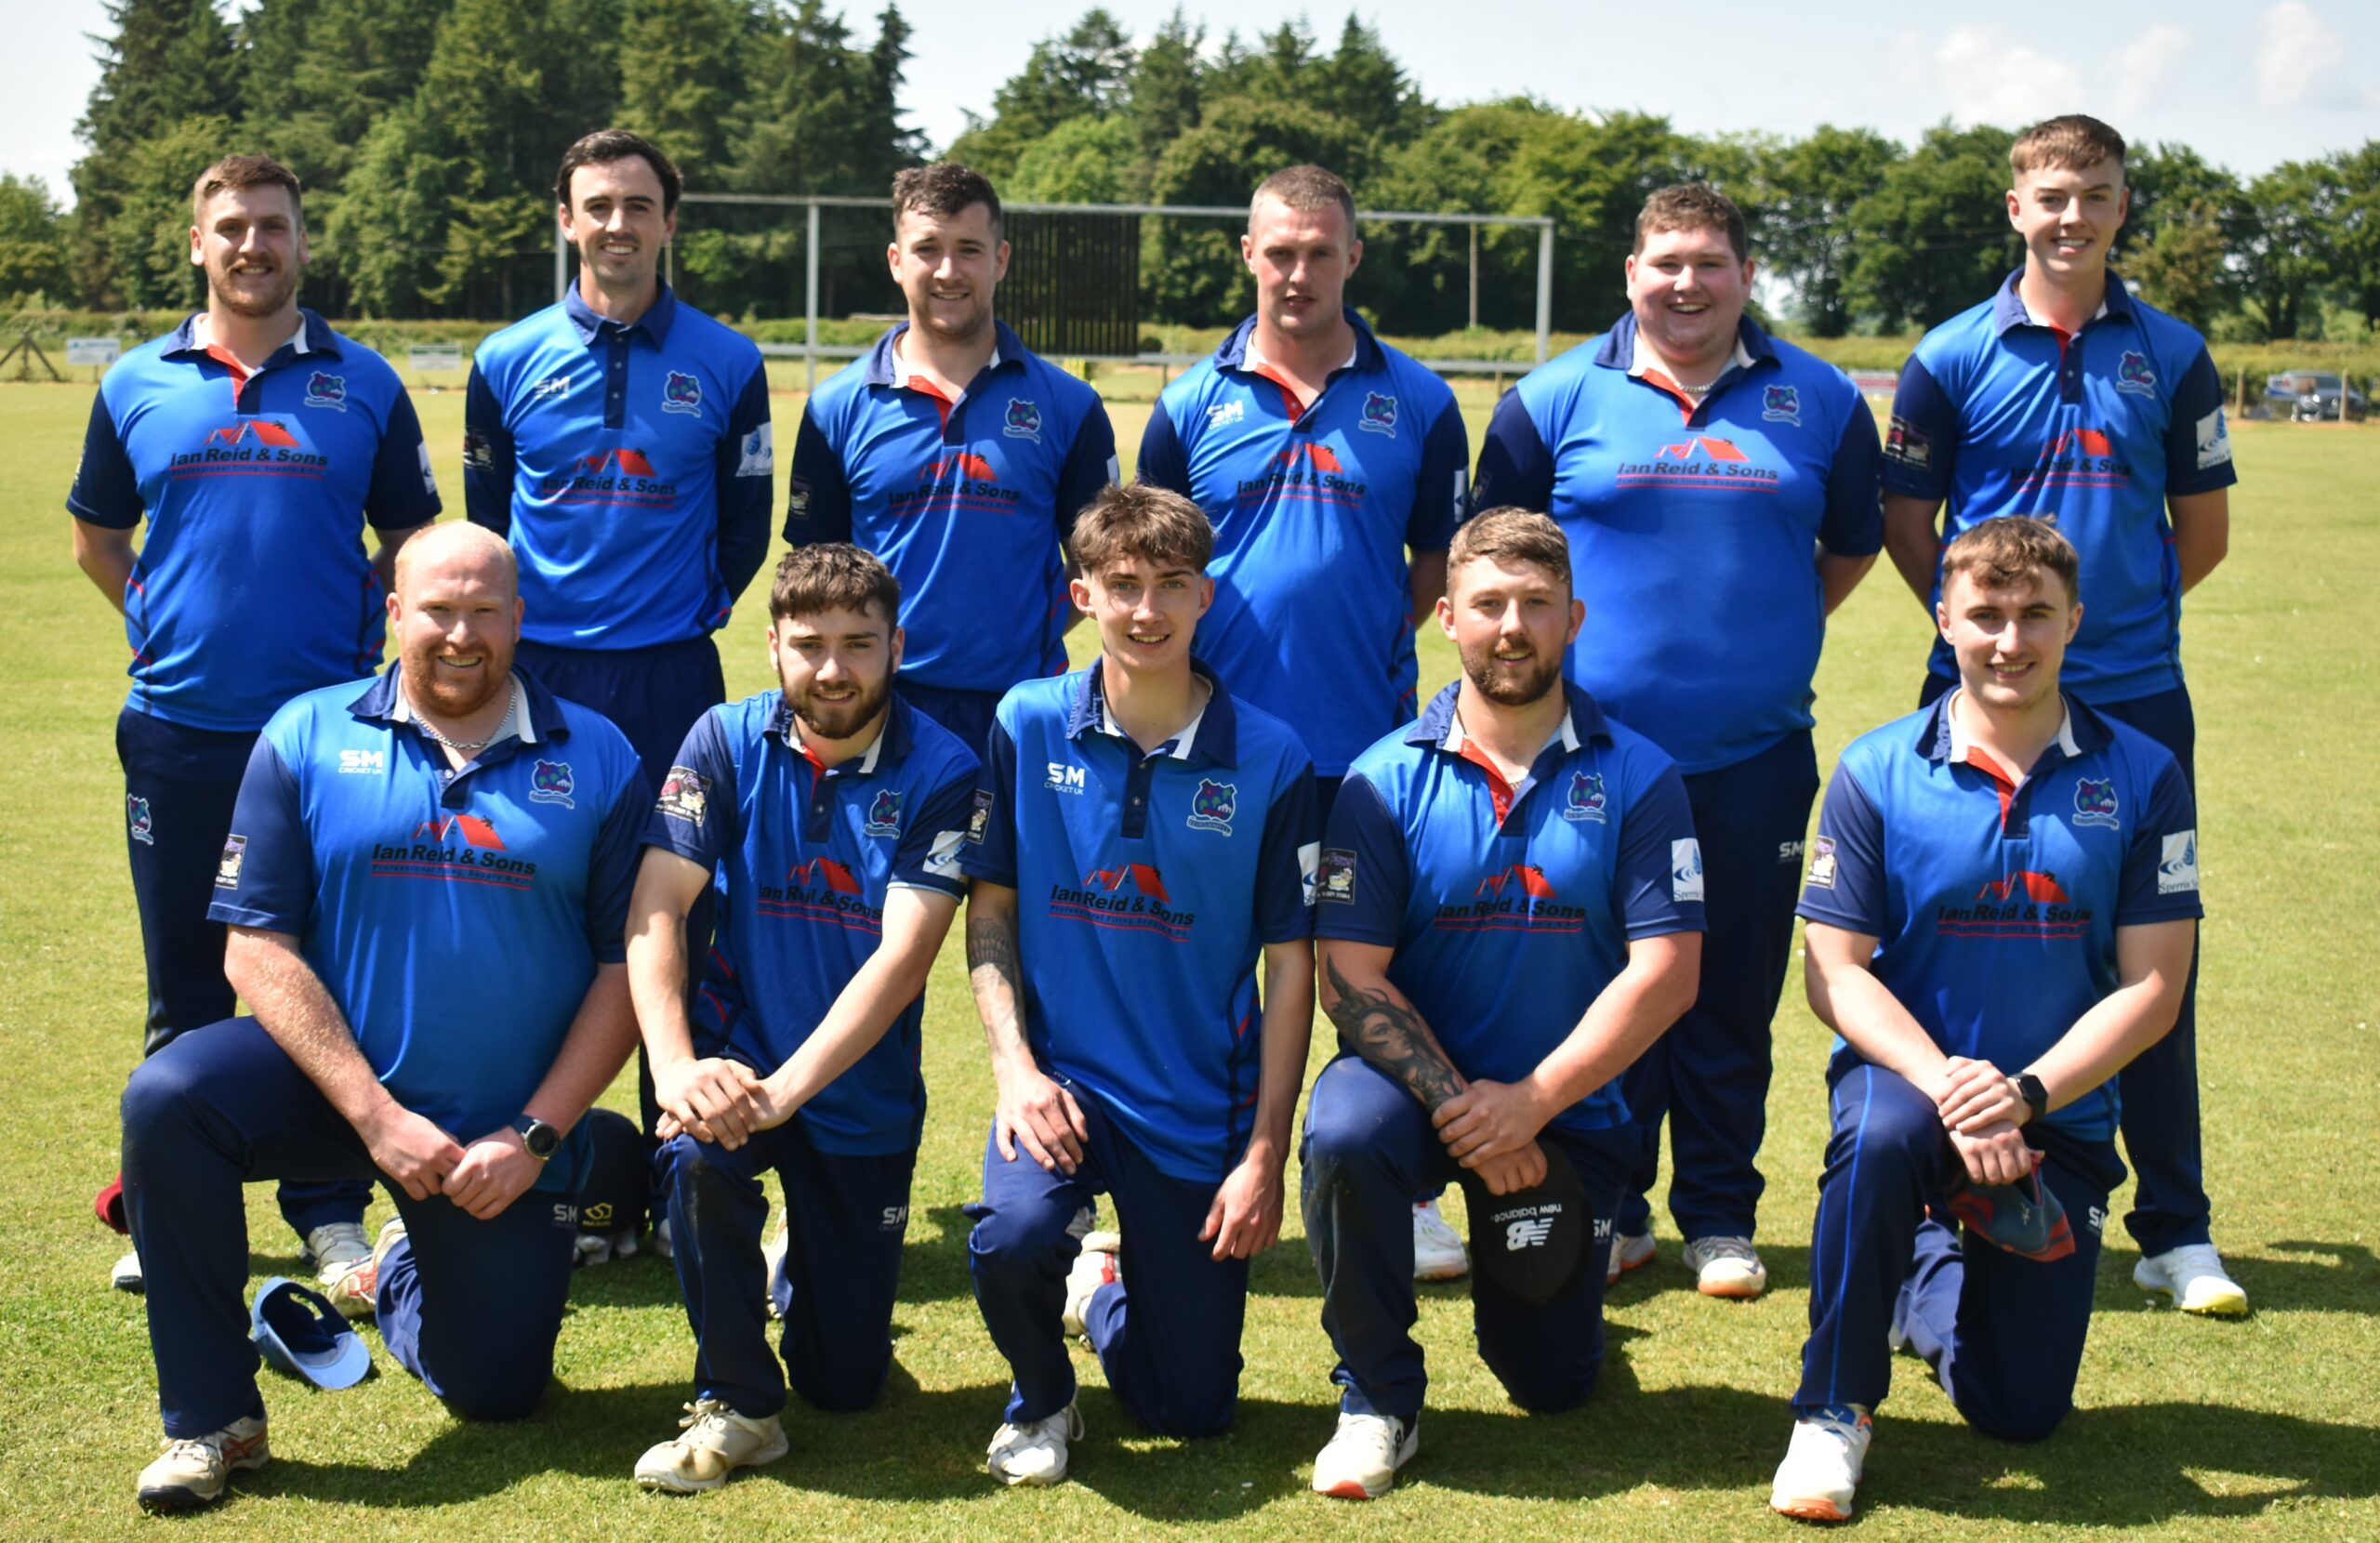 Cricket Ireland: Killyclooney Cricket Club - The small club with big ambitions